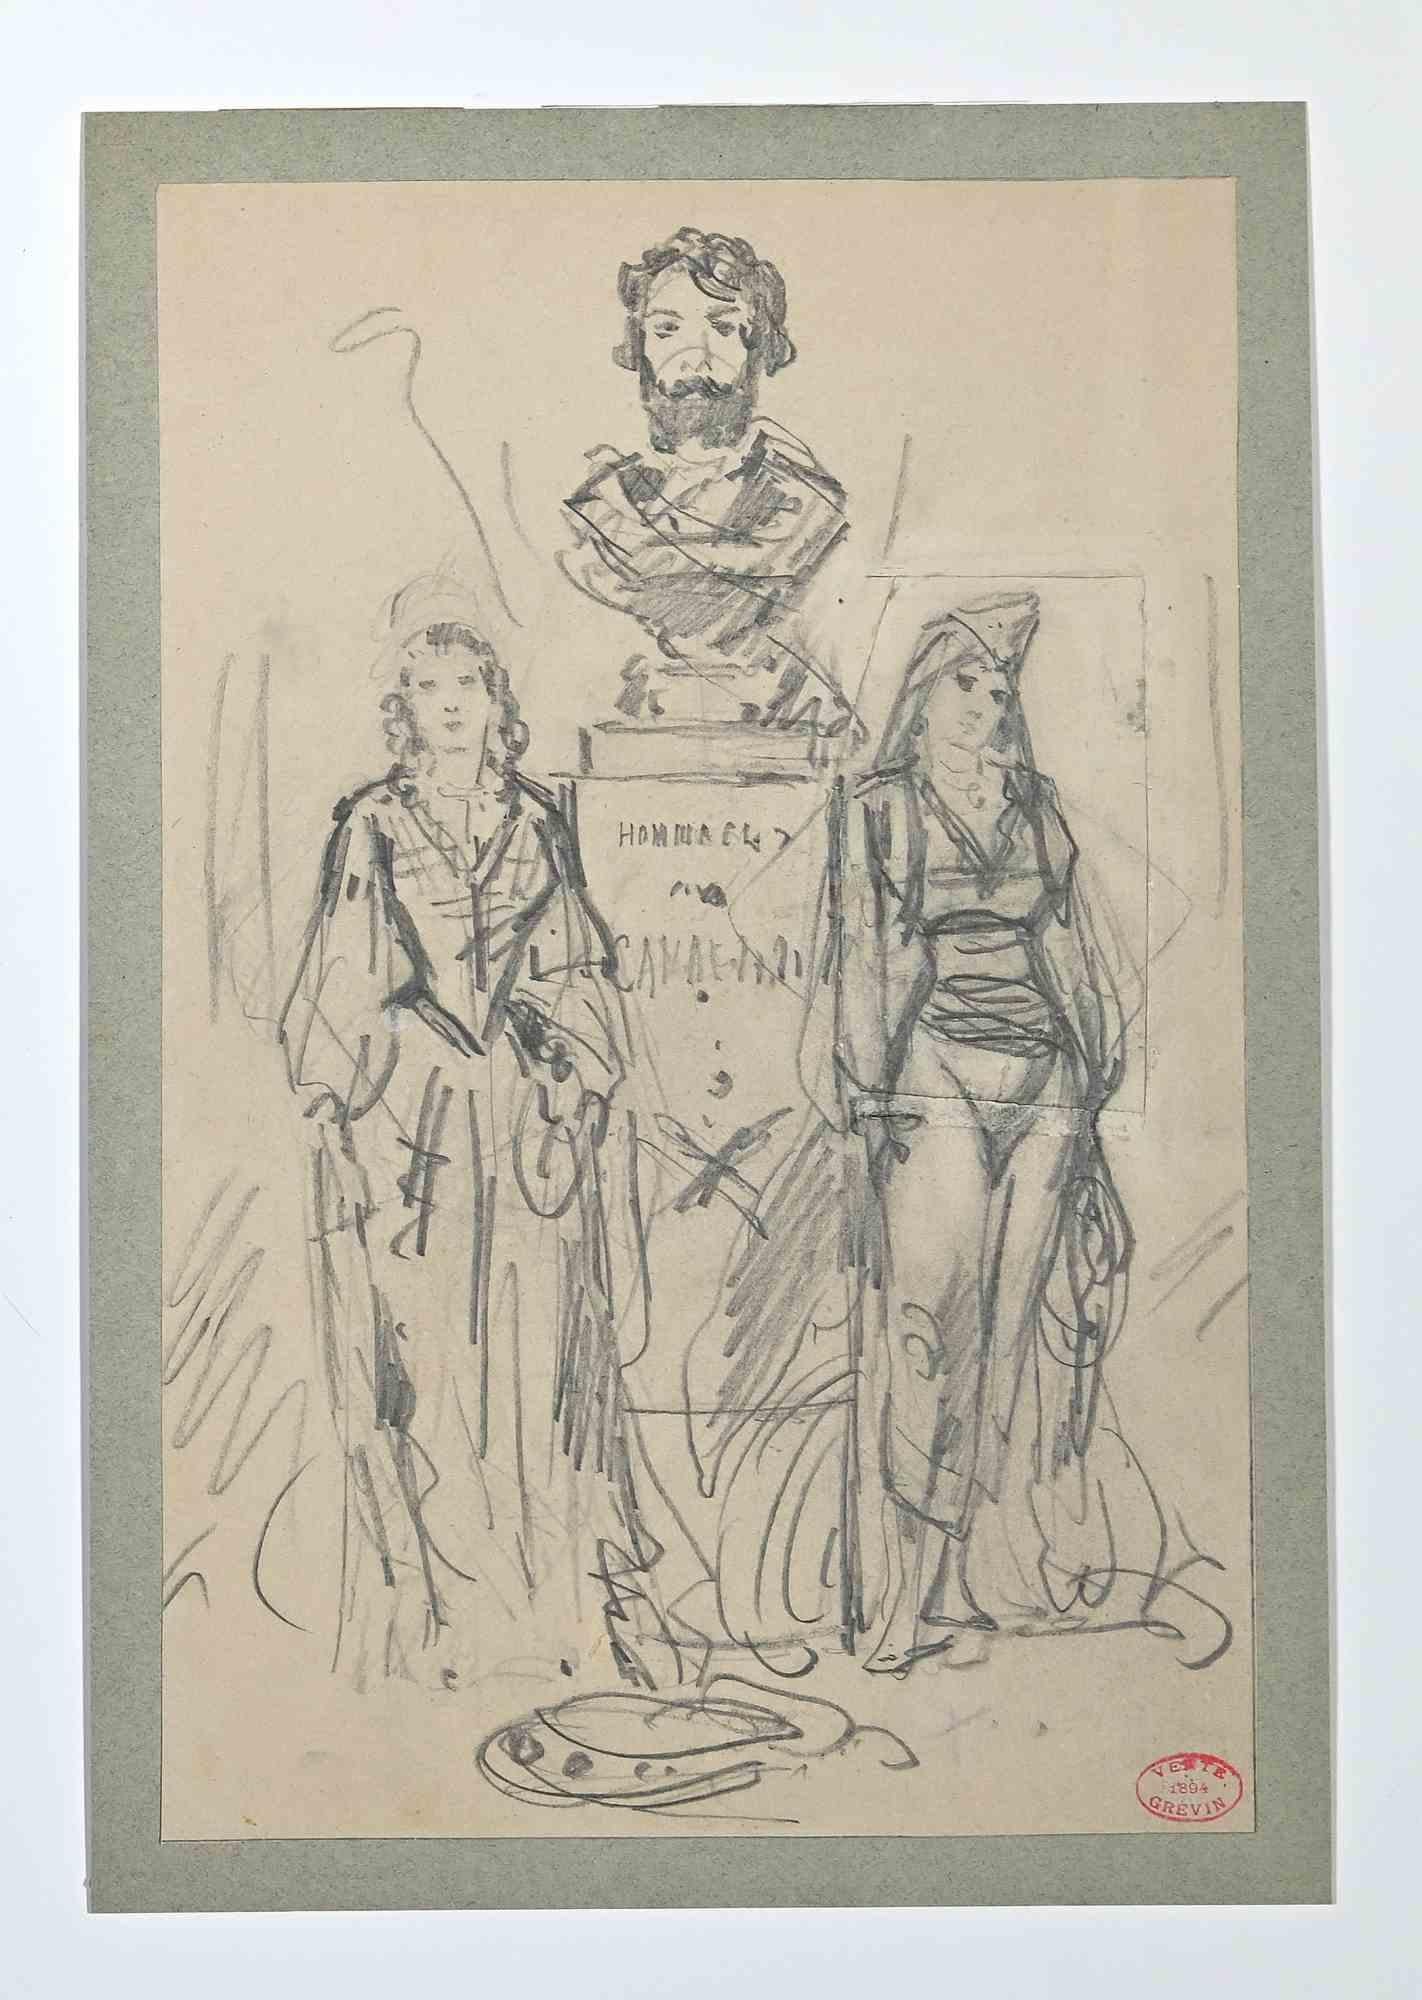 The Statue and Women - Original Drawing by Alfred Grevin - Late 19th Century